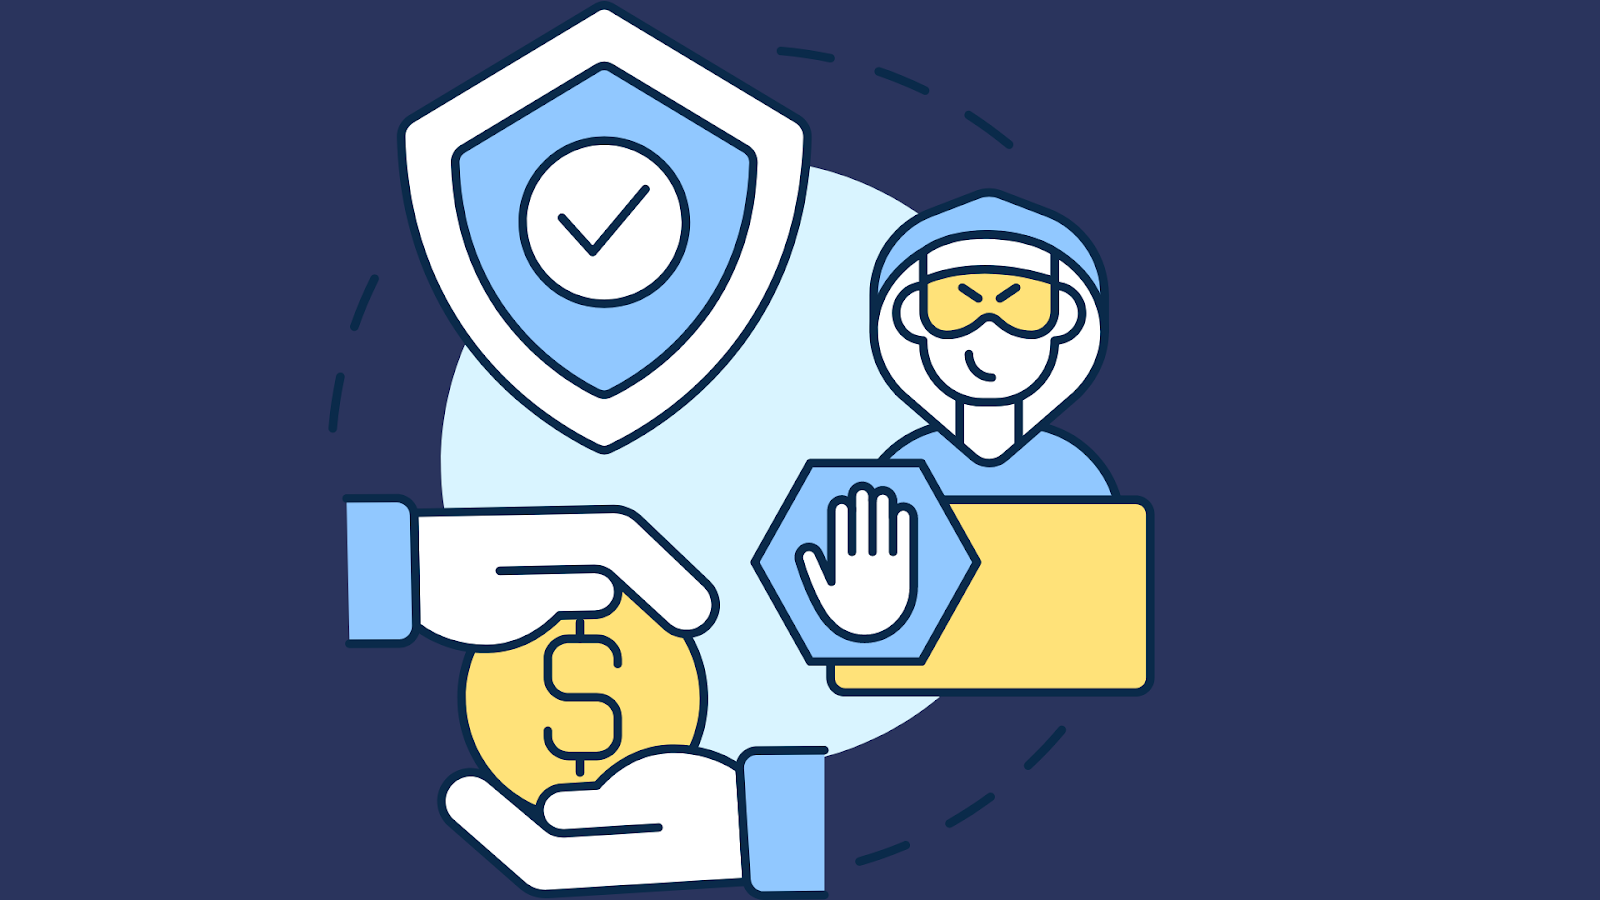 Illustration of secure financial transactions protected by a Phone Validator, depicting a shield with a checkmark and a figure blocking fraud.